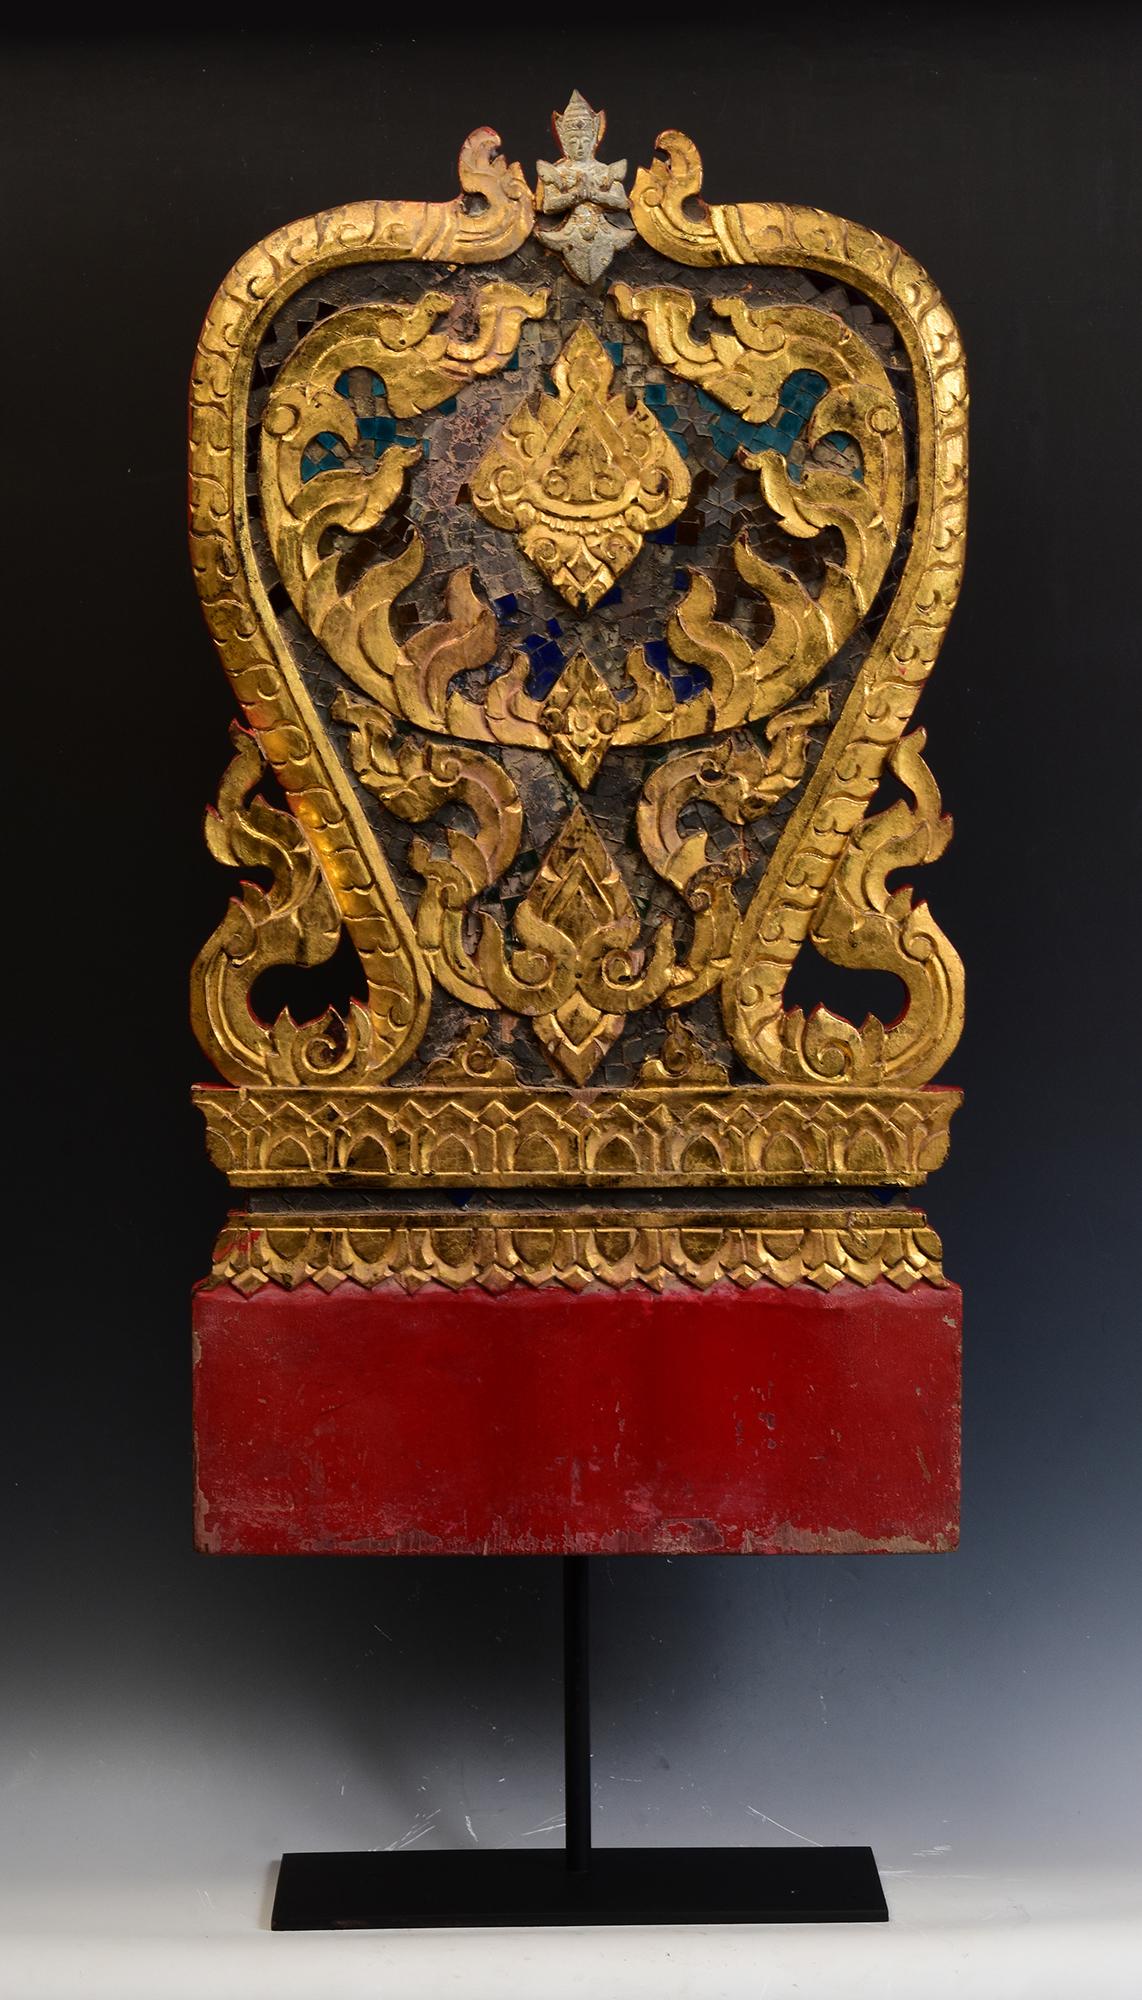 Antique Thai wood carving with angel, carved as Naga under leaf-shape, painted with lacquer and golden color, decorated with mirror-tiles, used for temple decoration.

Age: Thailand, 19th Century
Size: Height 71.4 C.M. / Width 37.8 C.M. / Thickness